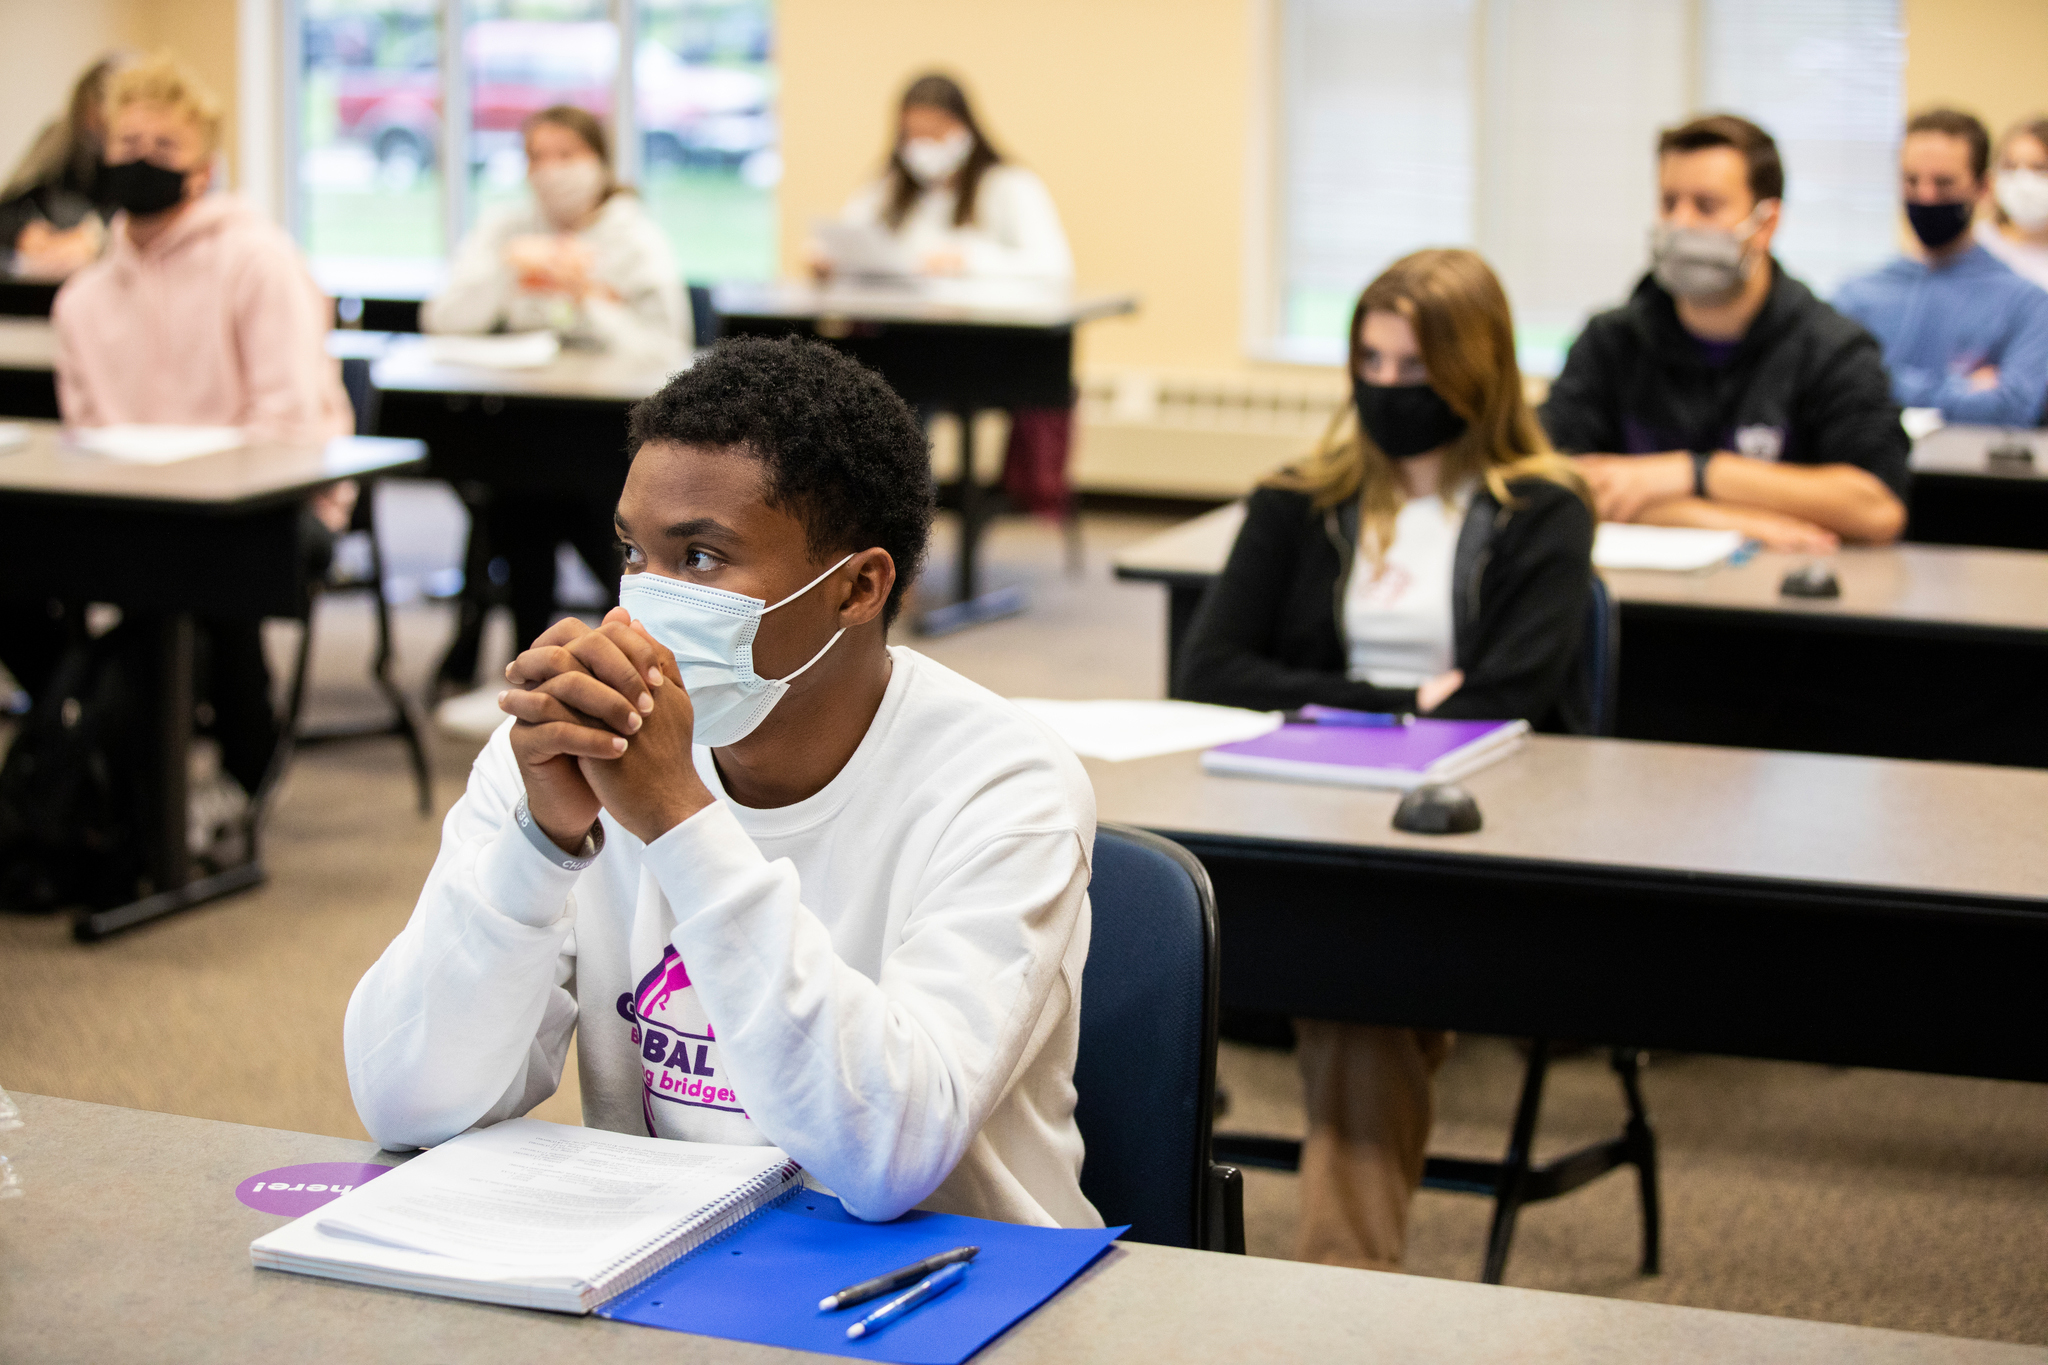 Student listening to lecture in class wearing mask